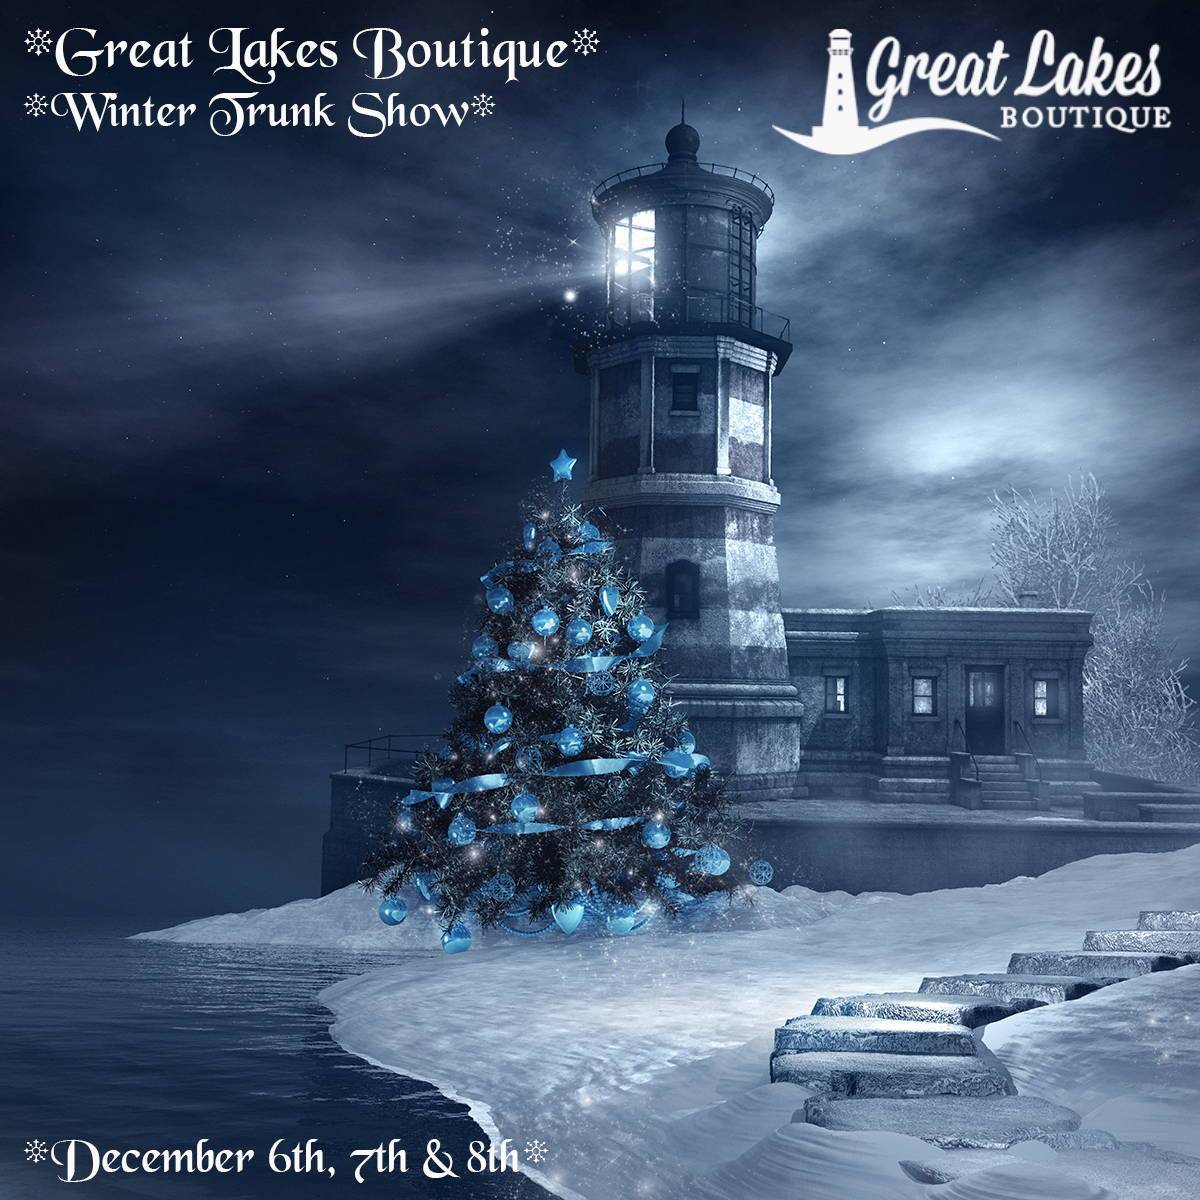 Great Lakes Boutique Winter Wonderland Trollbeads Event Details (There'll be Barrels..)